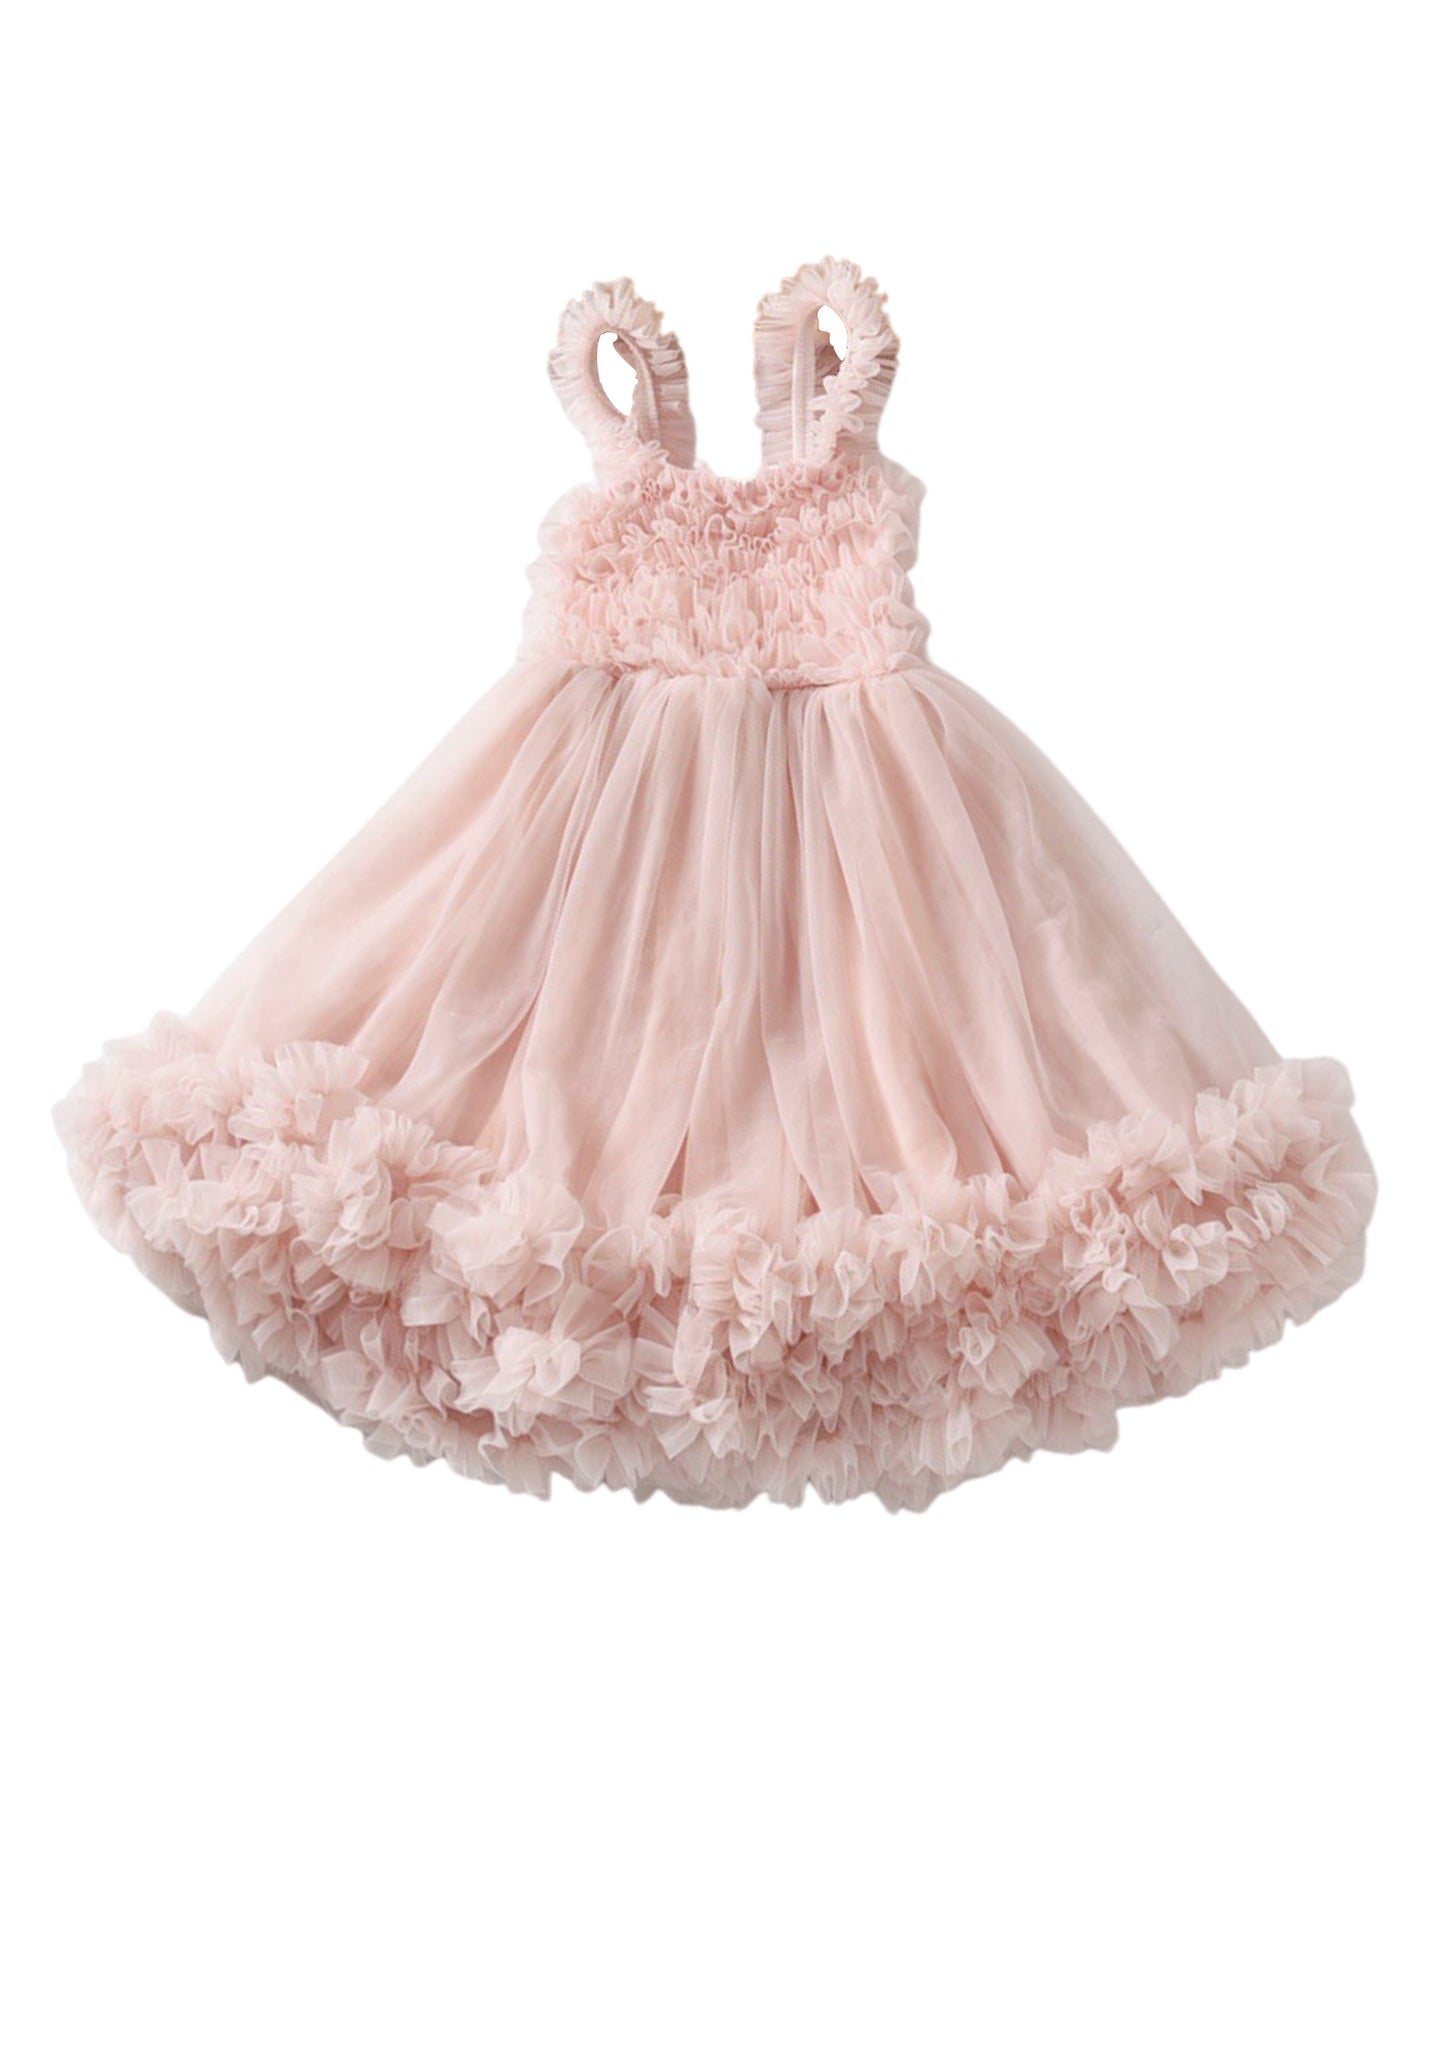 DOLLY by Le Petit Tom ® PETTIDRESS ballet pink